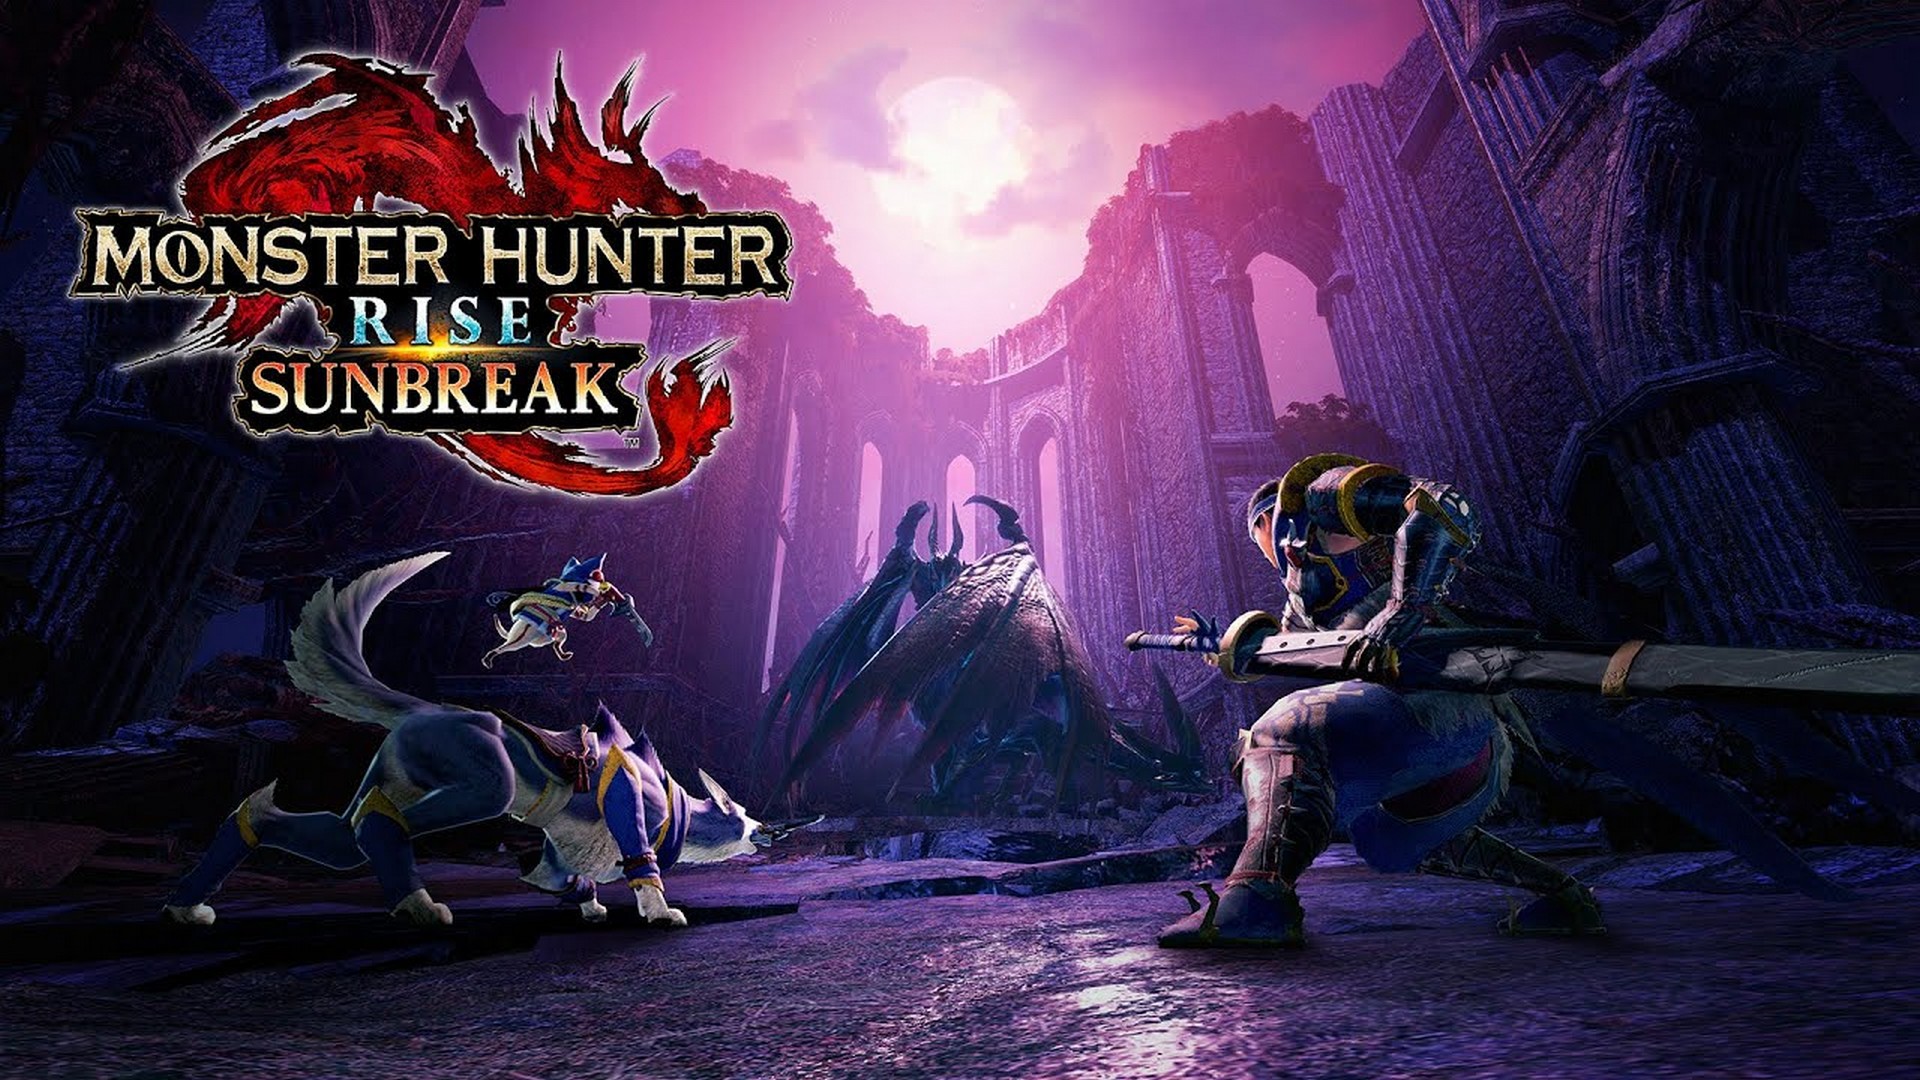 Monster Hunter Rise: Sunbreak May Digital Event Debuts Fierce New Monsters, Combat Options, and Follower Quests Alongside New Trailer